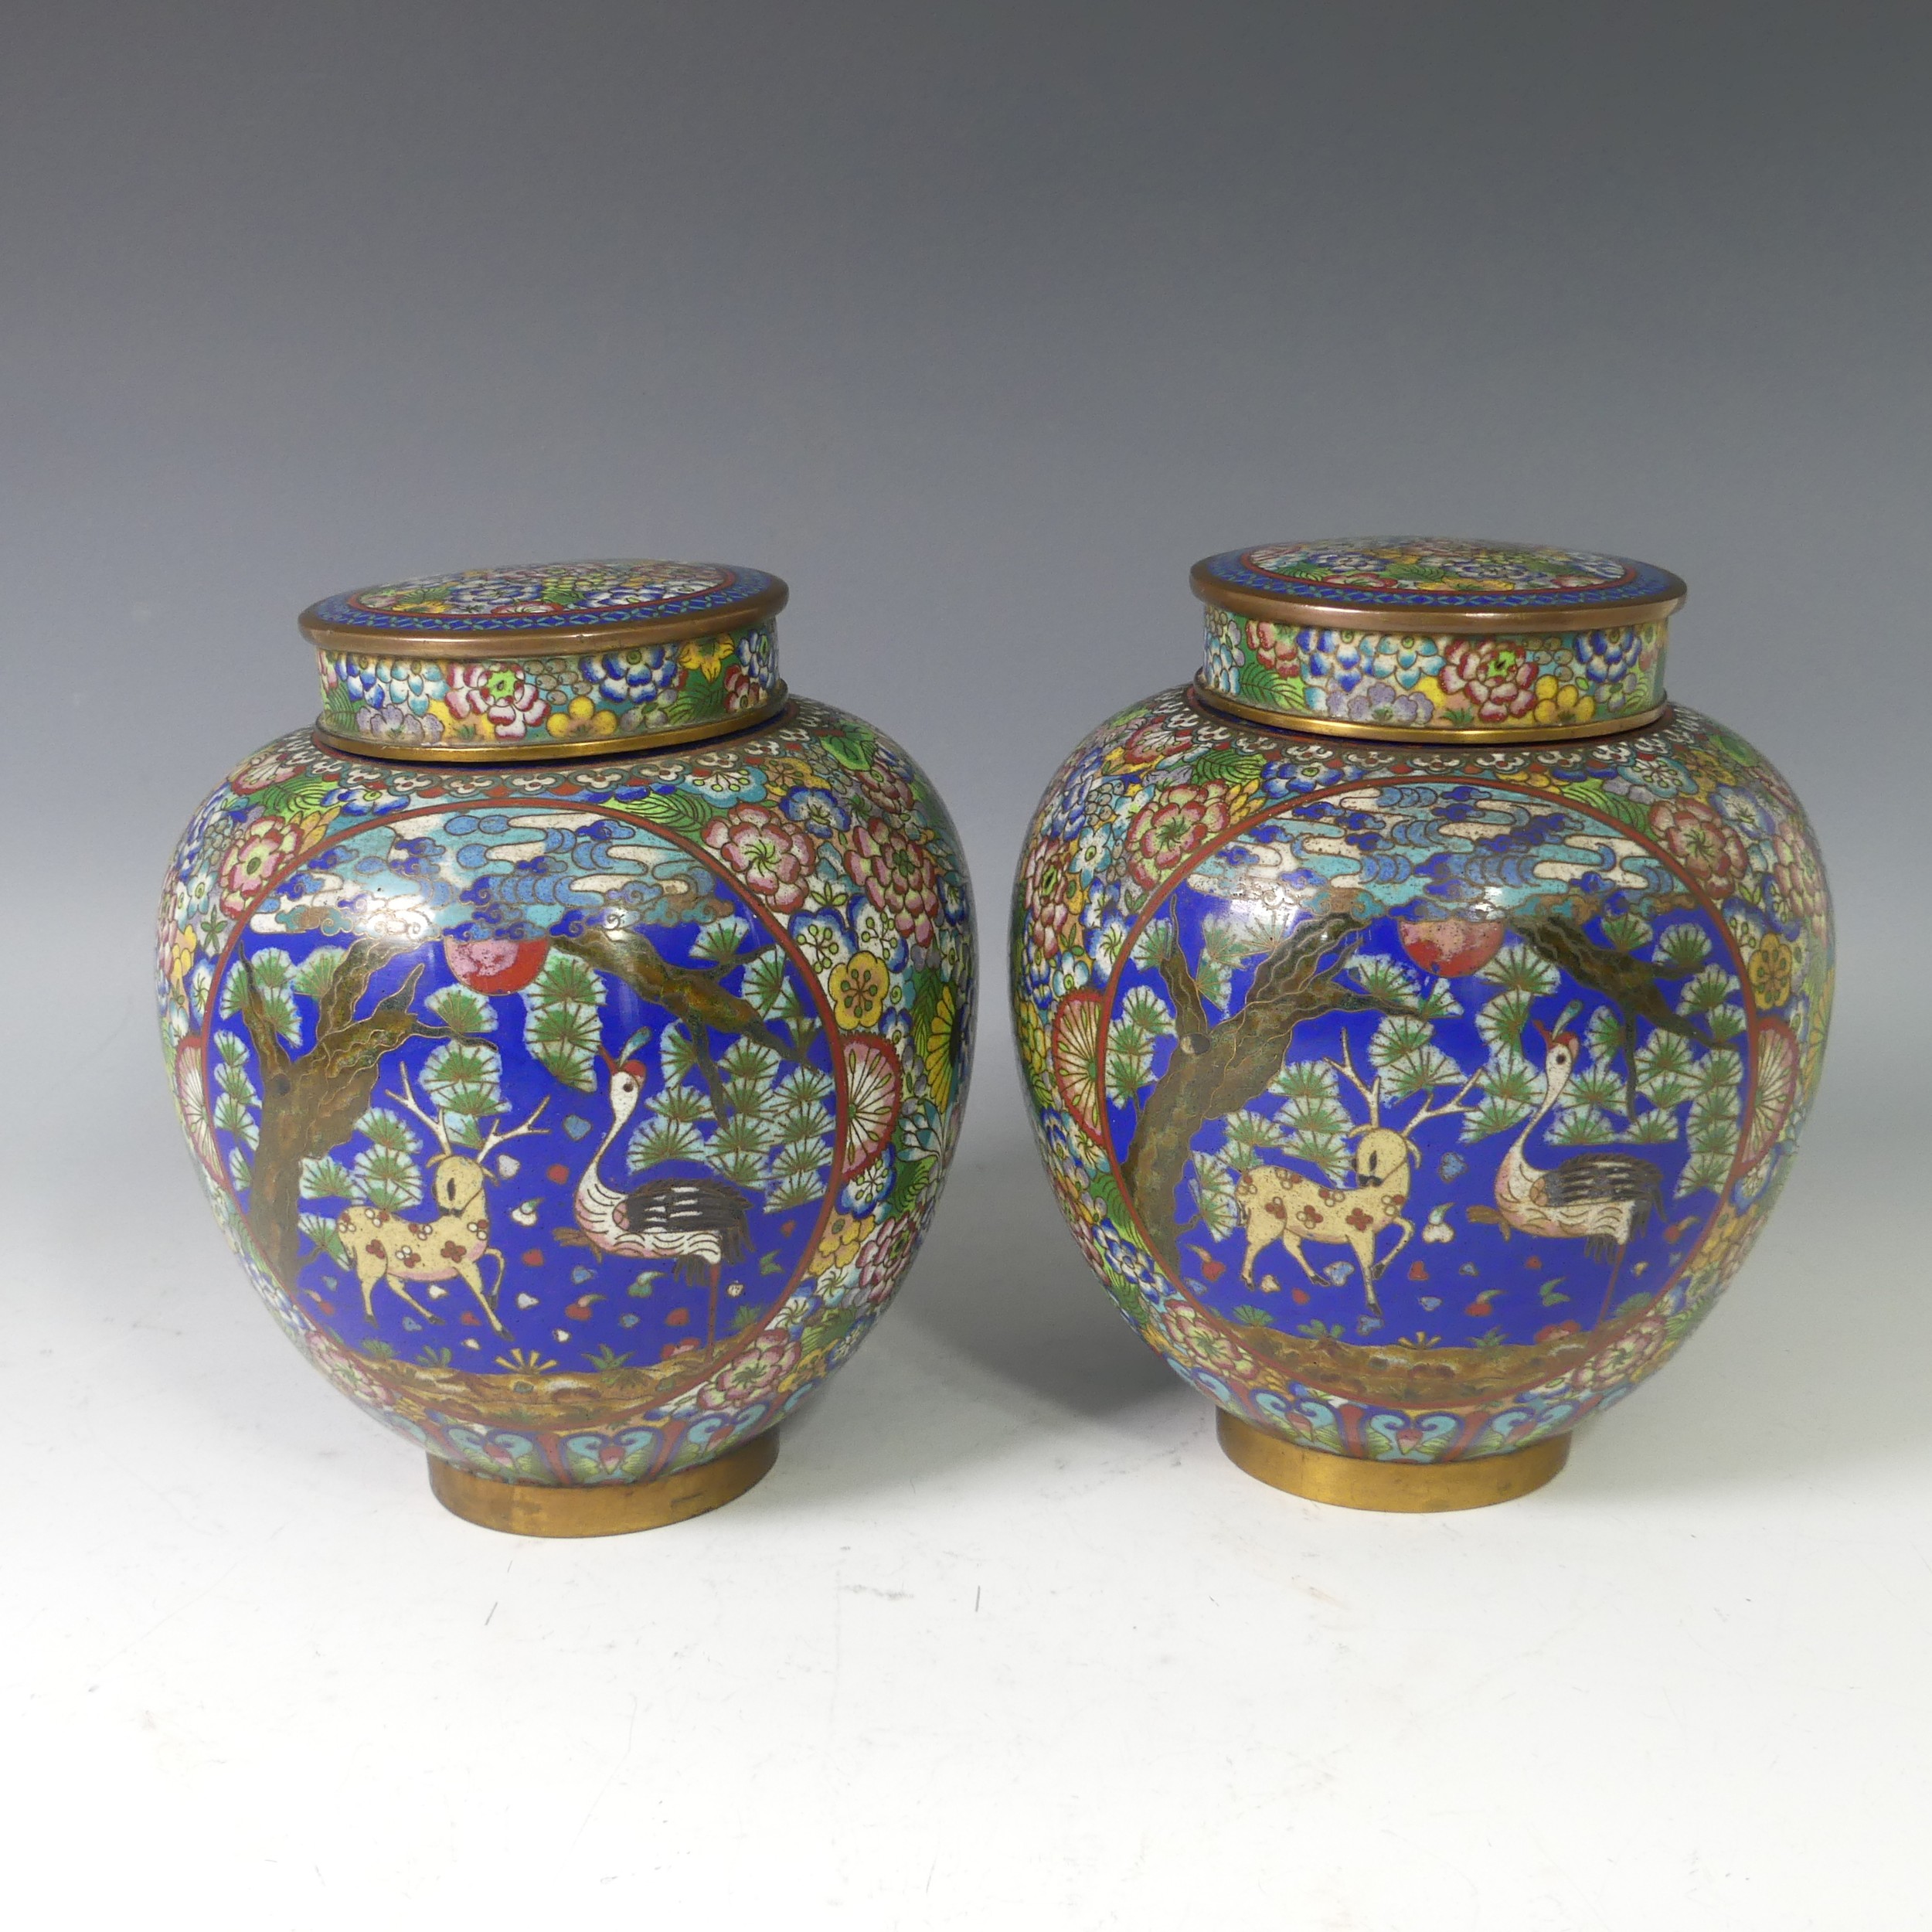 A pair of Japanese cloisonne lidded Jars, decorated with a panel depicting birds and mythical beasts - Image 2 of 5